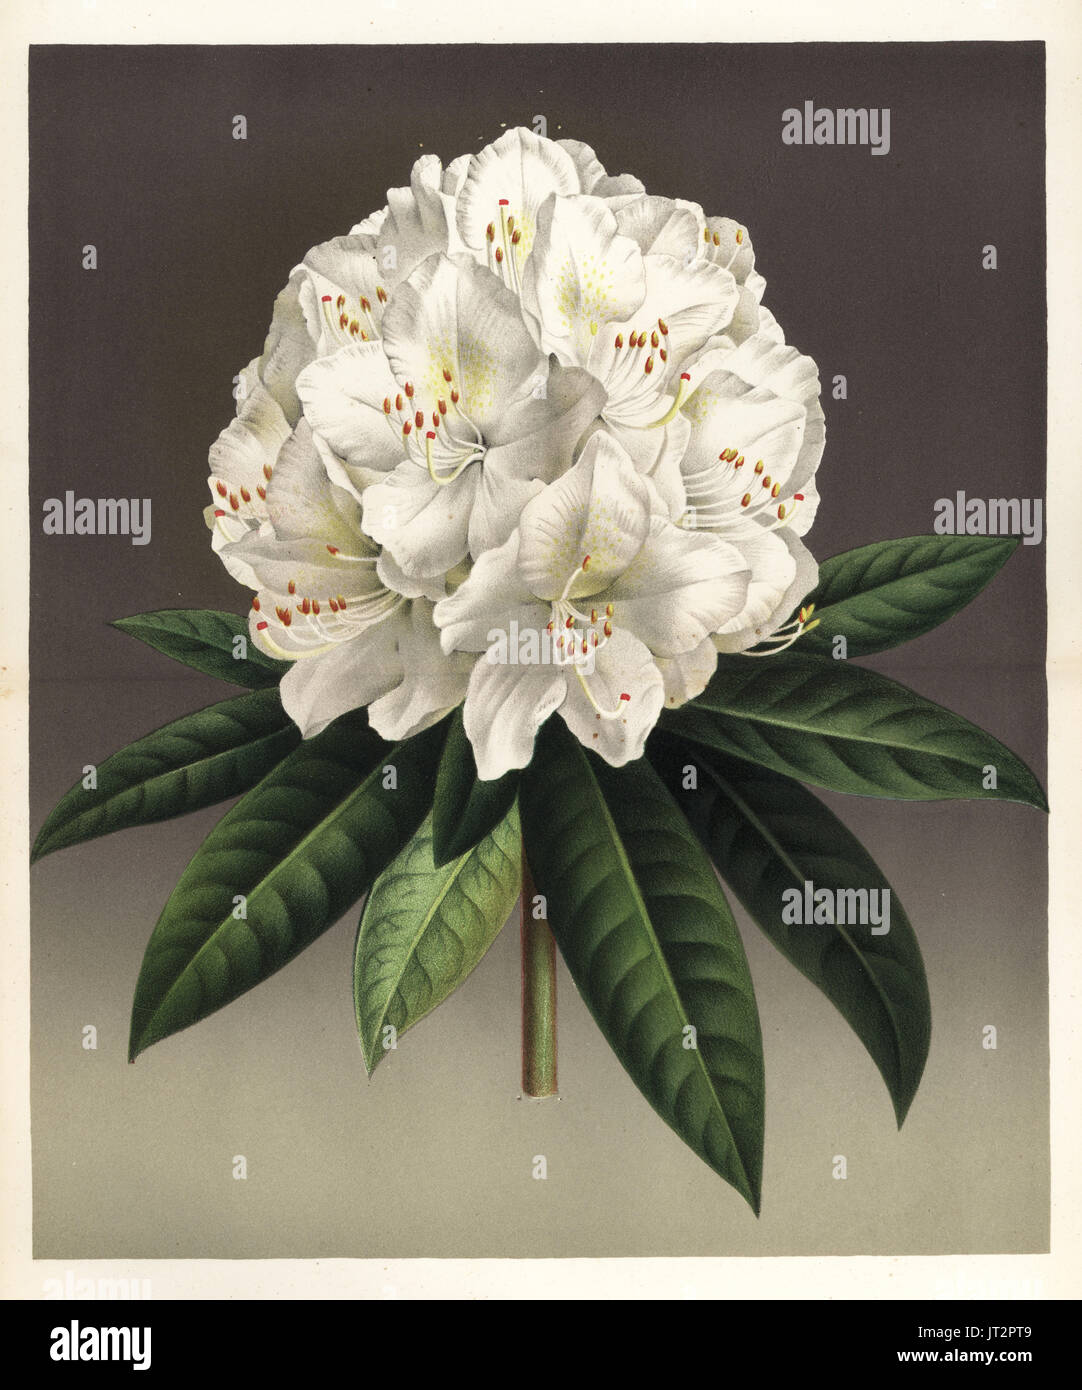 Rhododendron hybridum, Princesse Louise. Chromolithograph by P. de Pannemaeker from Jean Linden's l'Illustration Horticole, Brussels, 1873. Stock Photo